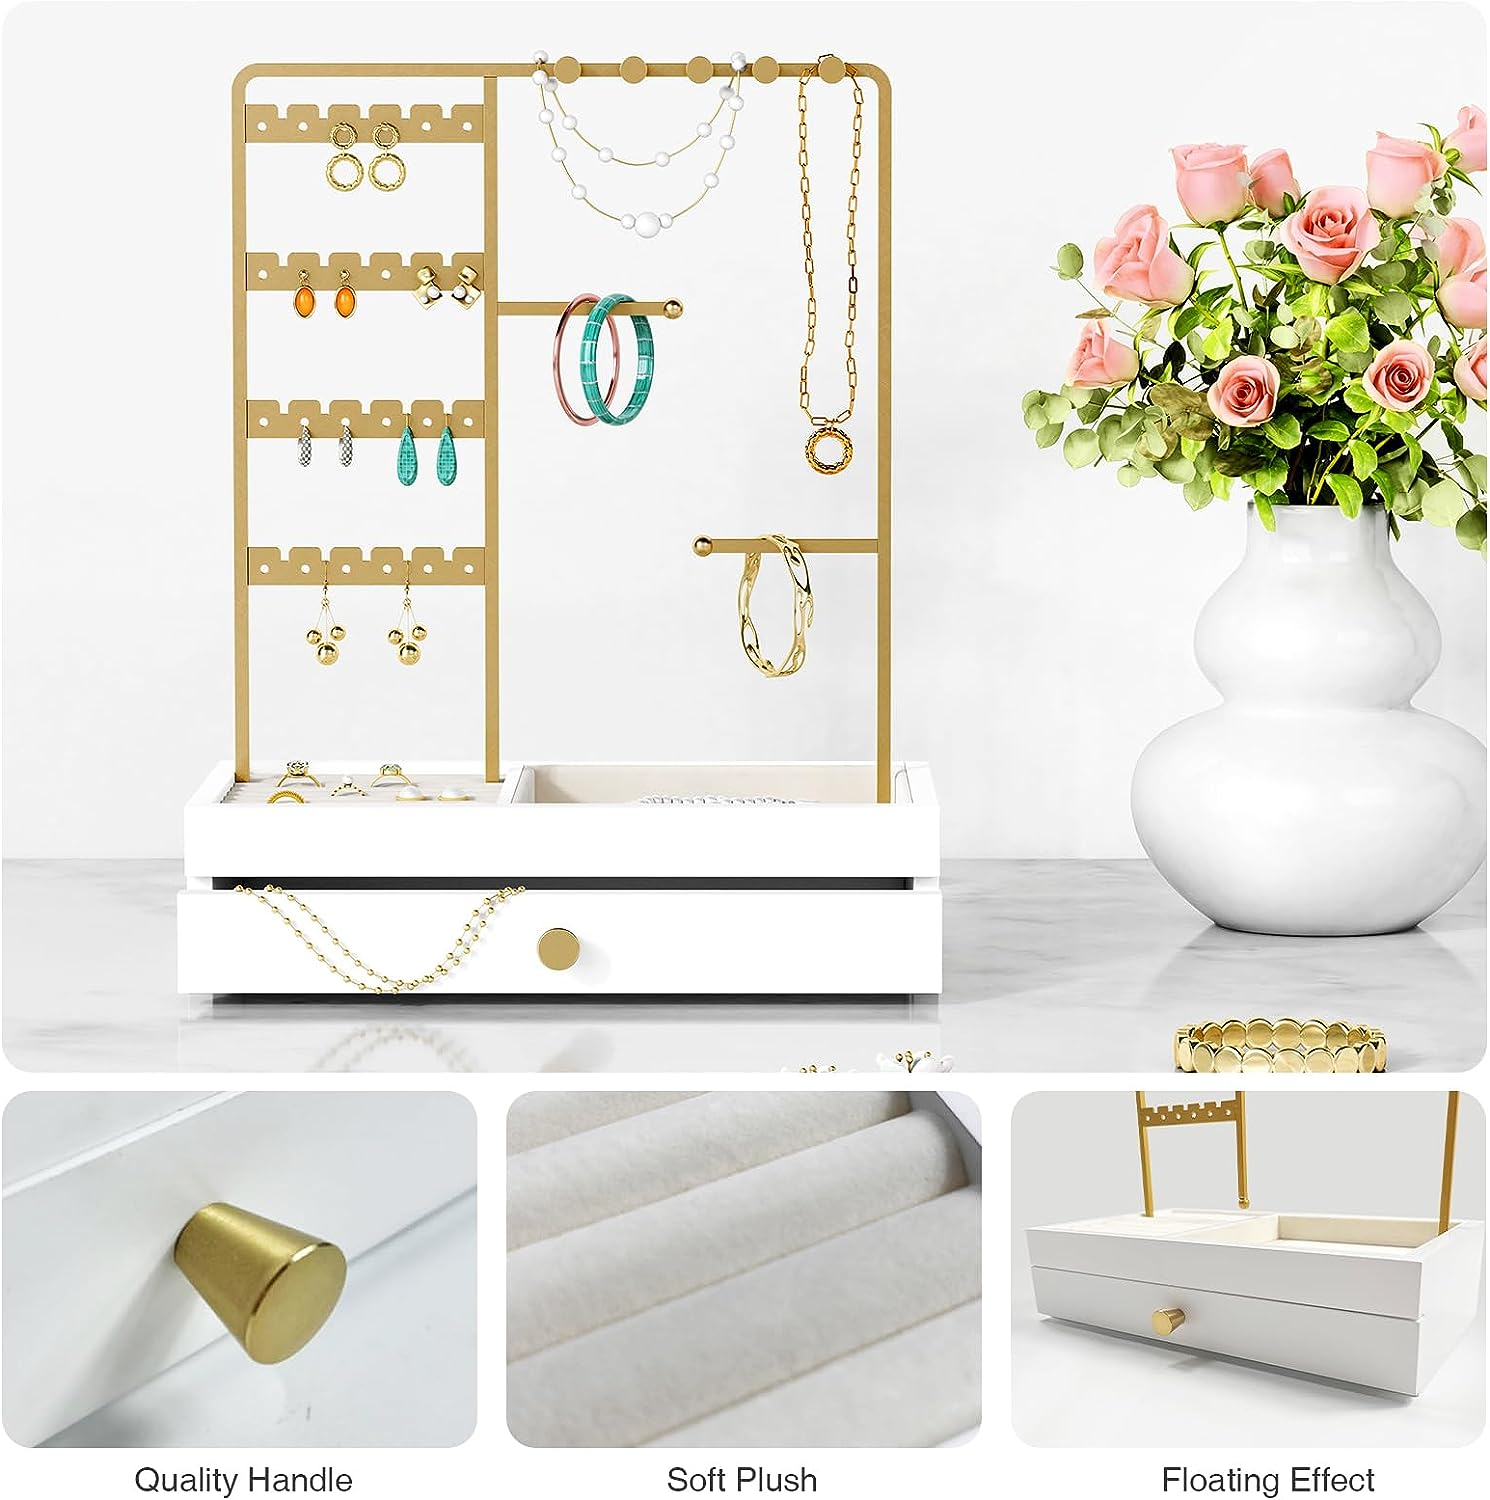 Goozii Jewelry Holder Organizer Stand for Women Girls, Aesthetic Rings Earring Bracelet Necklace Holder for Vanity Dresser, Wood Jewelry Hanger Tree with Tray Drawer Storage Box -White and Gold